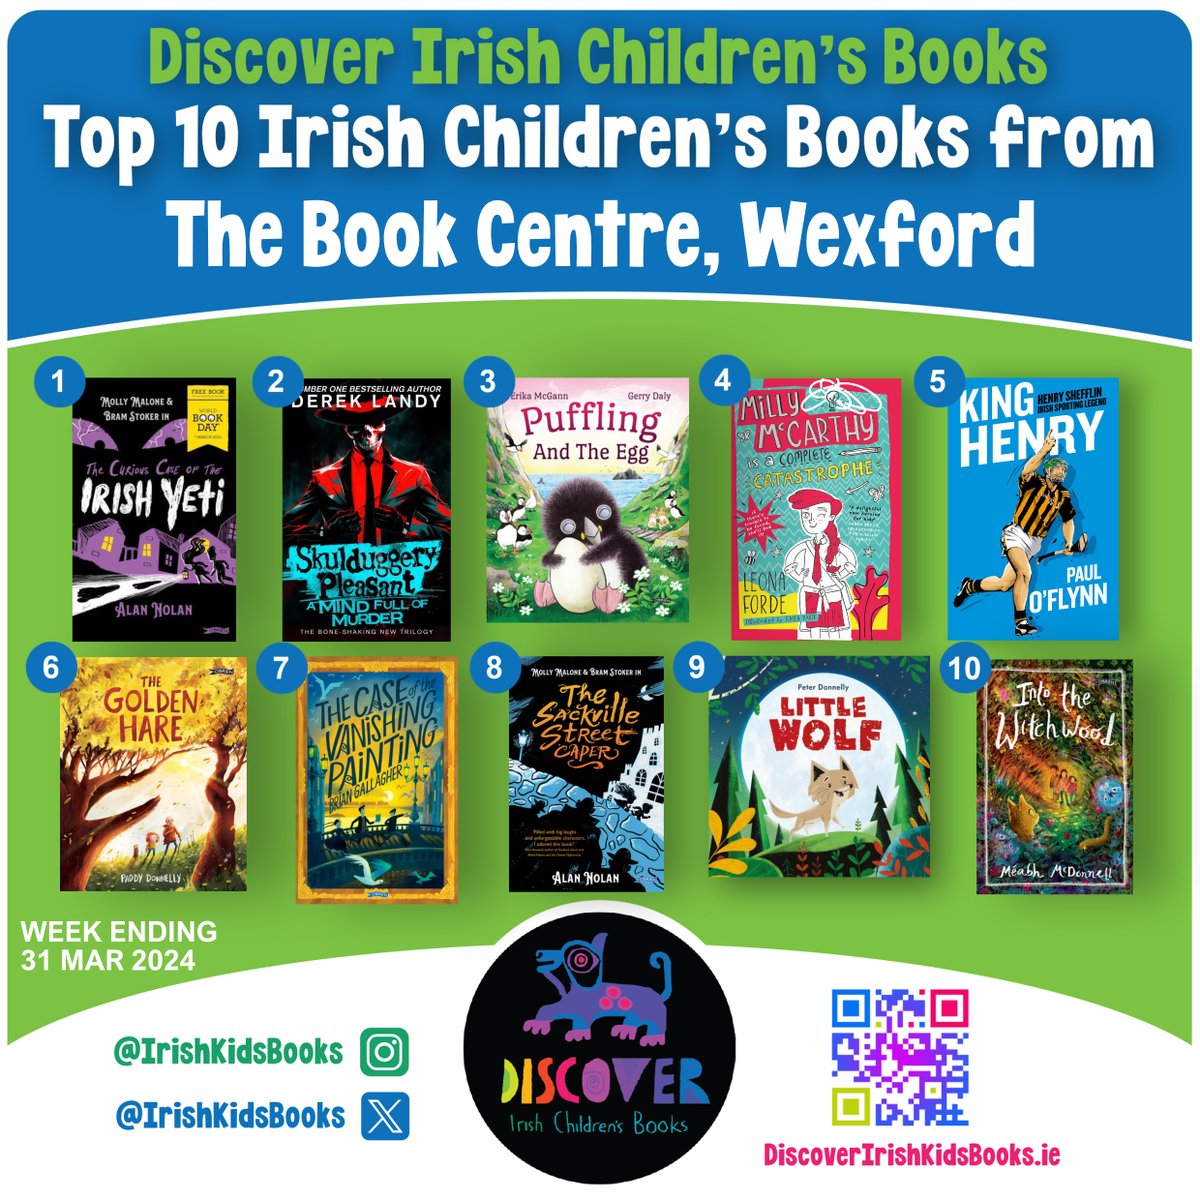 This week's Top 10 Children's Books comes from @TheBookCentres Wexford. @AlNolan is at number one with The Curious Case of the Irish Yeti and great to see newcomer @meabhmcdonnell at number 10 with her debut novel. Download the poster here: discoveririshkidsbooks.ie/blog/